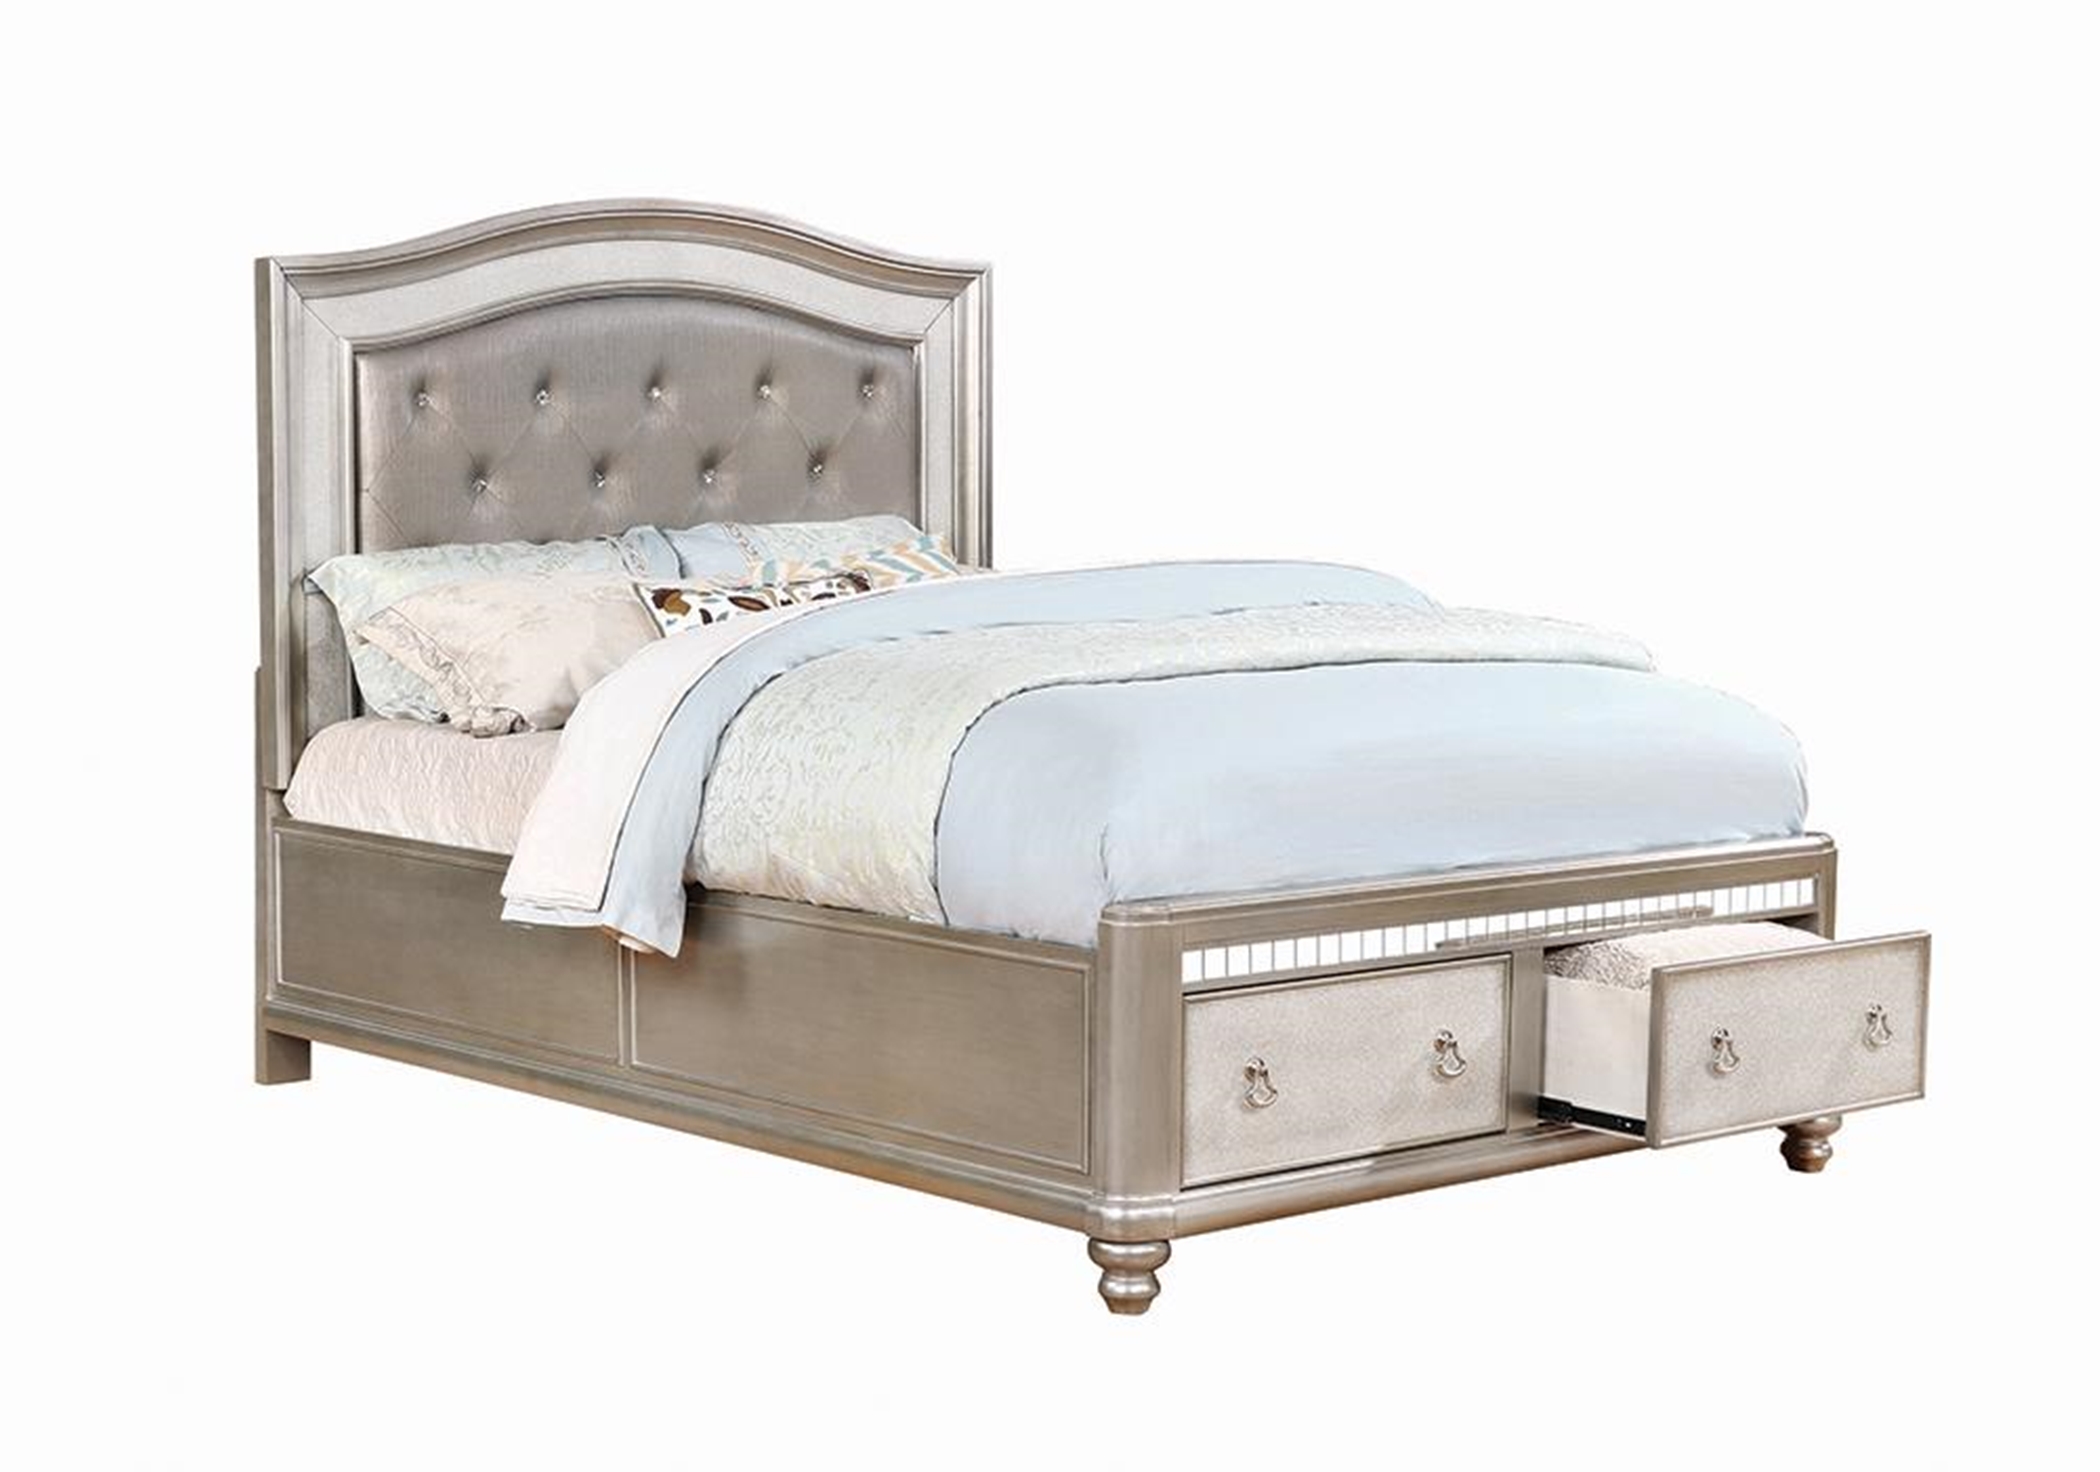 Bling Game Metallic Queen Bed - Click Image to Close